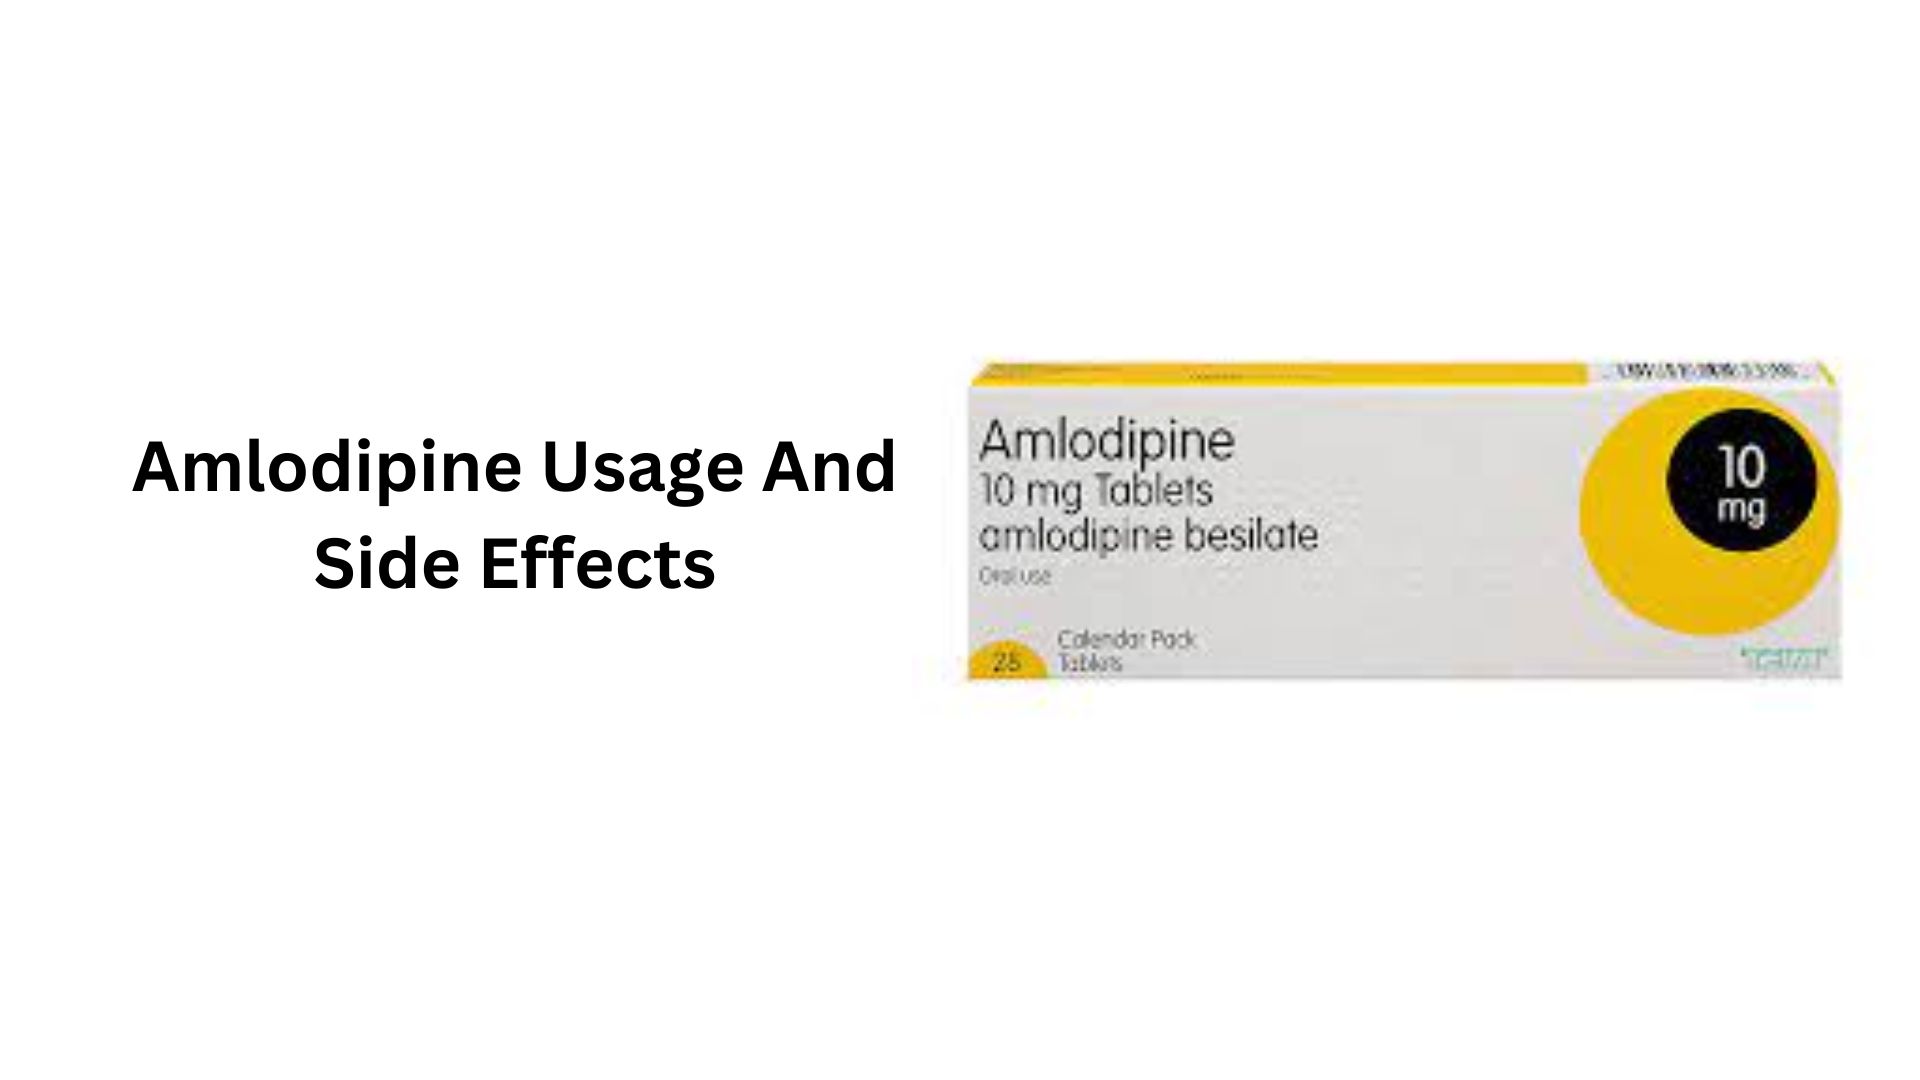 Amlodipine Usage And Side Effects